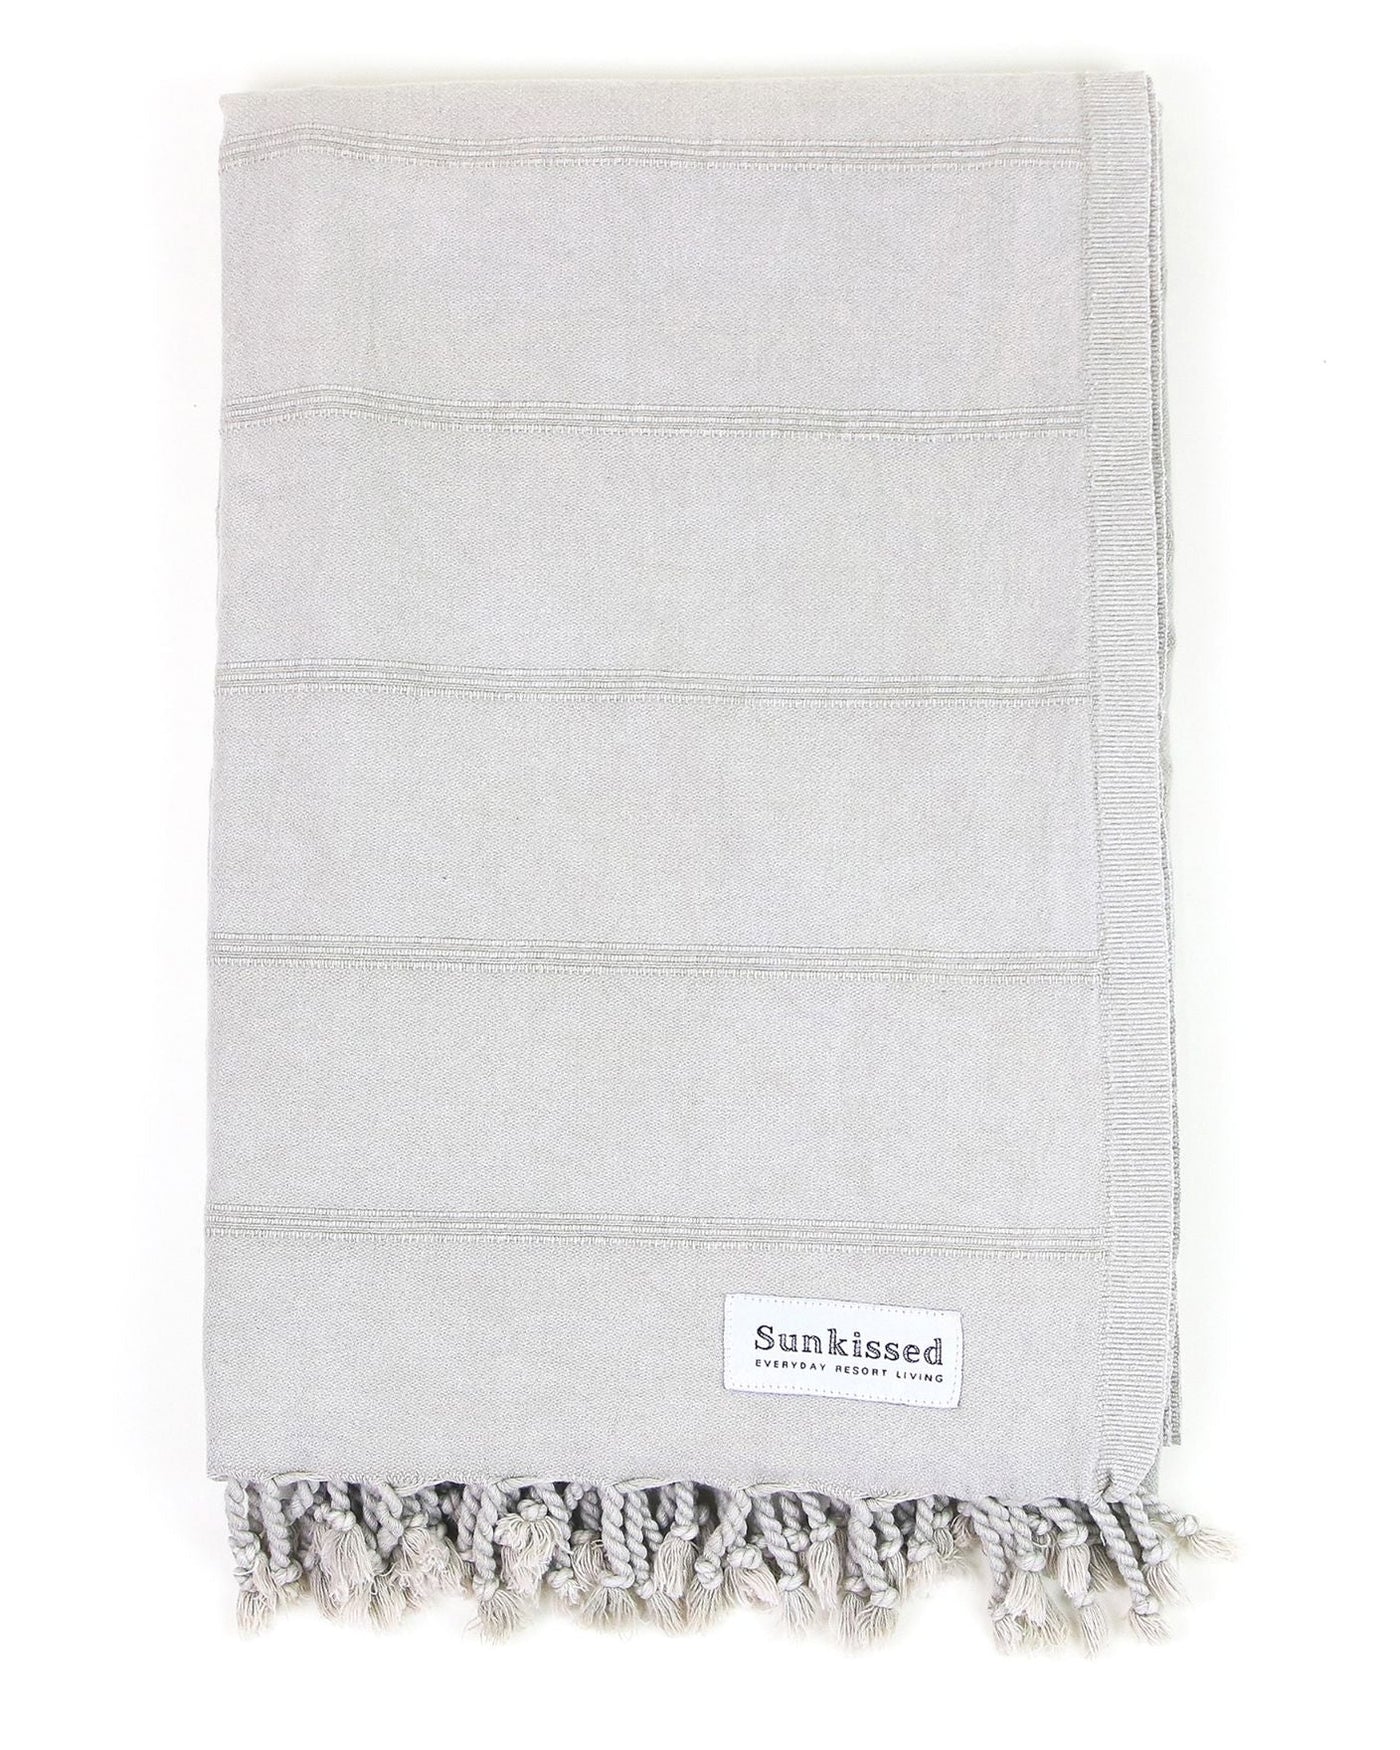 Tulum • Sand Free Beach Towel by Sunkissed